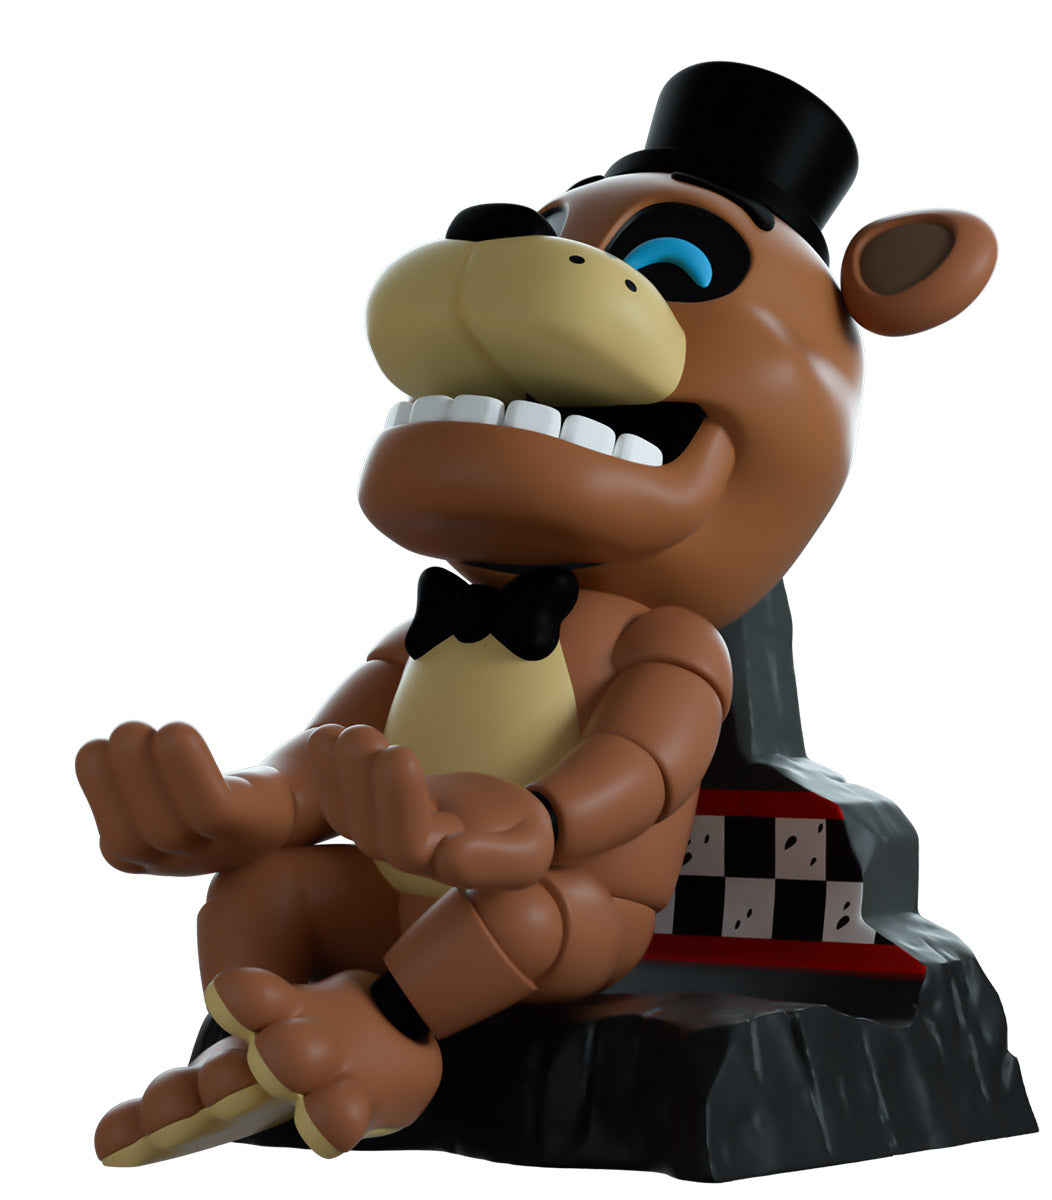 Youtooz Official Five Night's at Freddys Freddy Device Holder